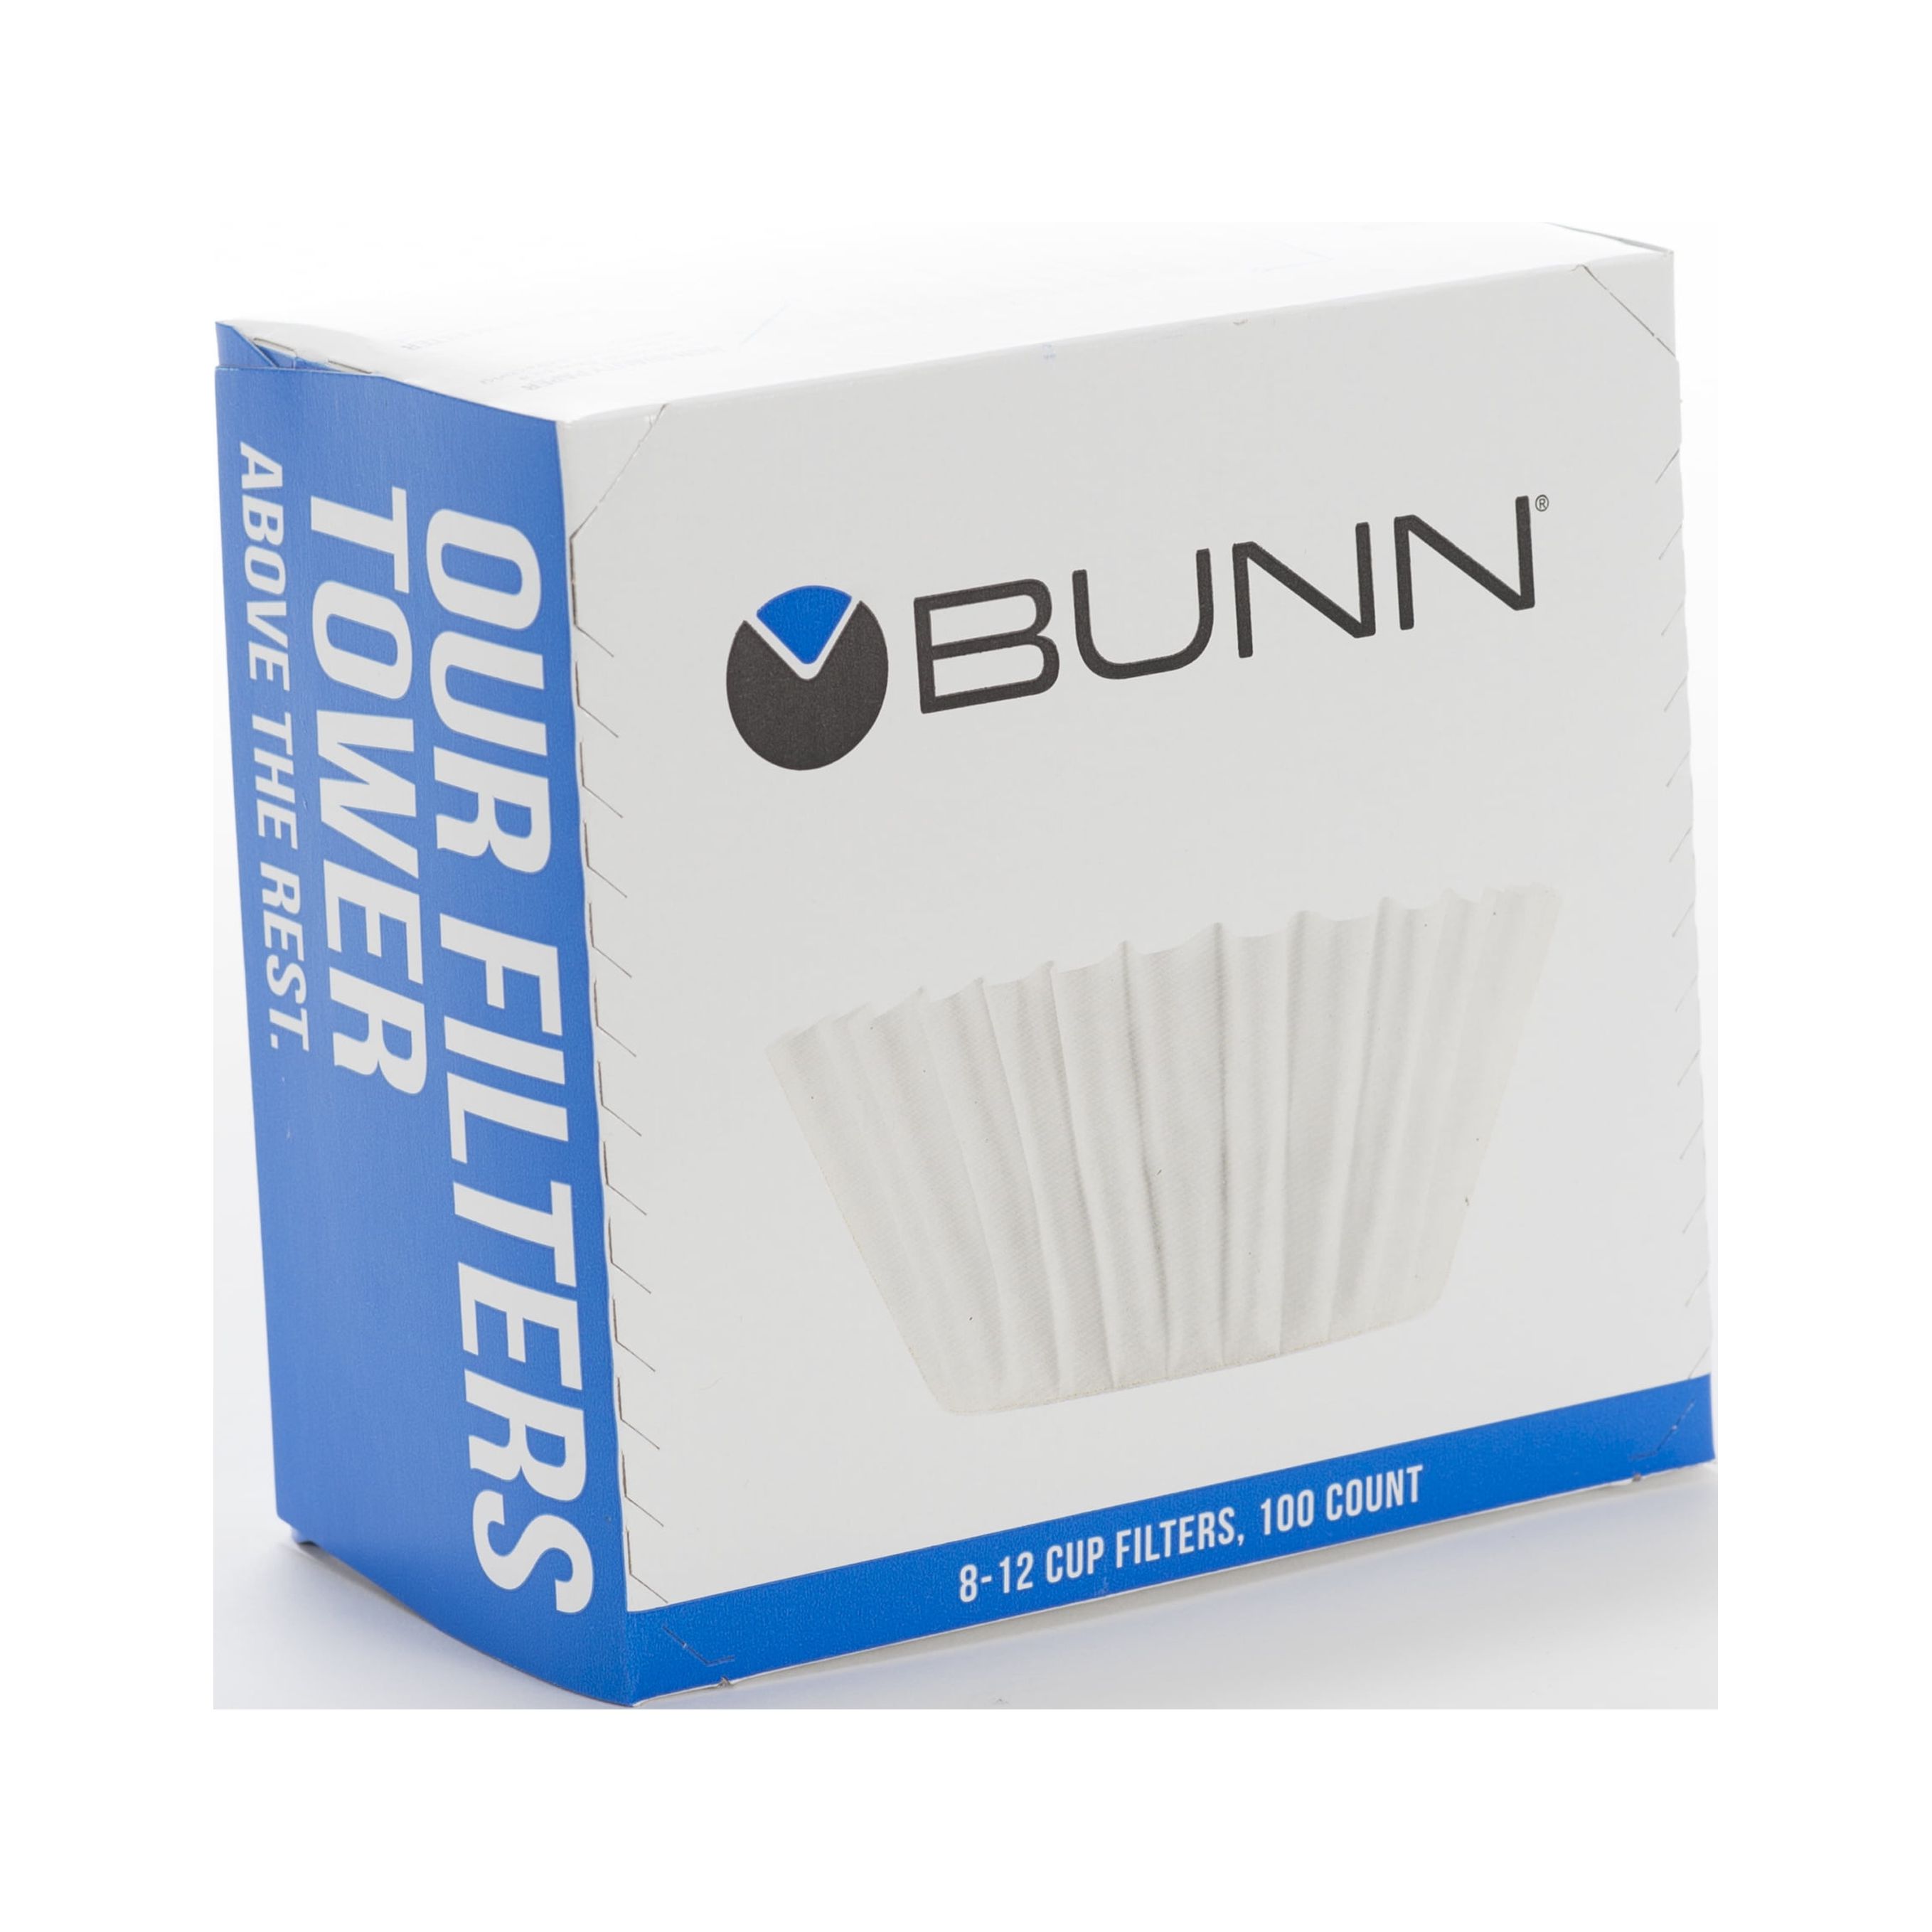 Bunn 8-12 Cup Premium Paper Coffee Filters, Flat - image 1 of 3